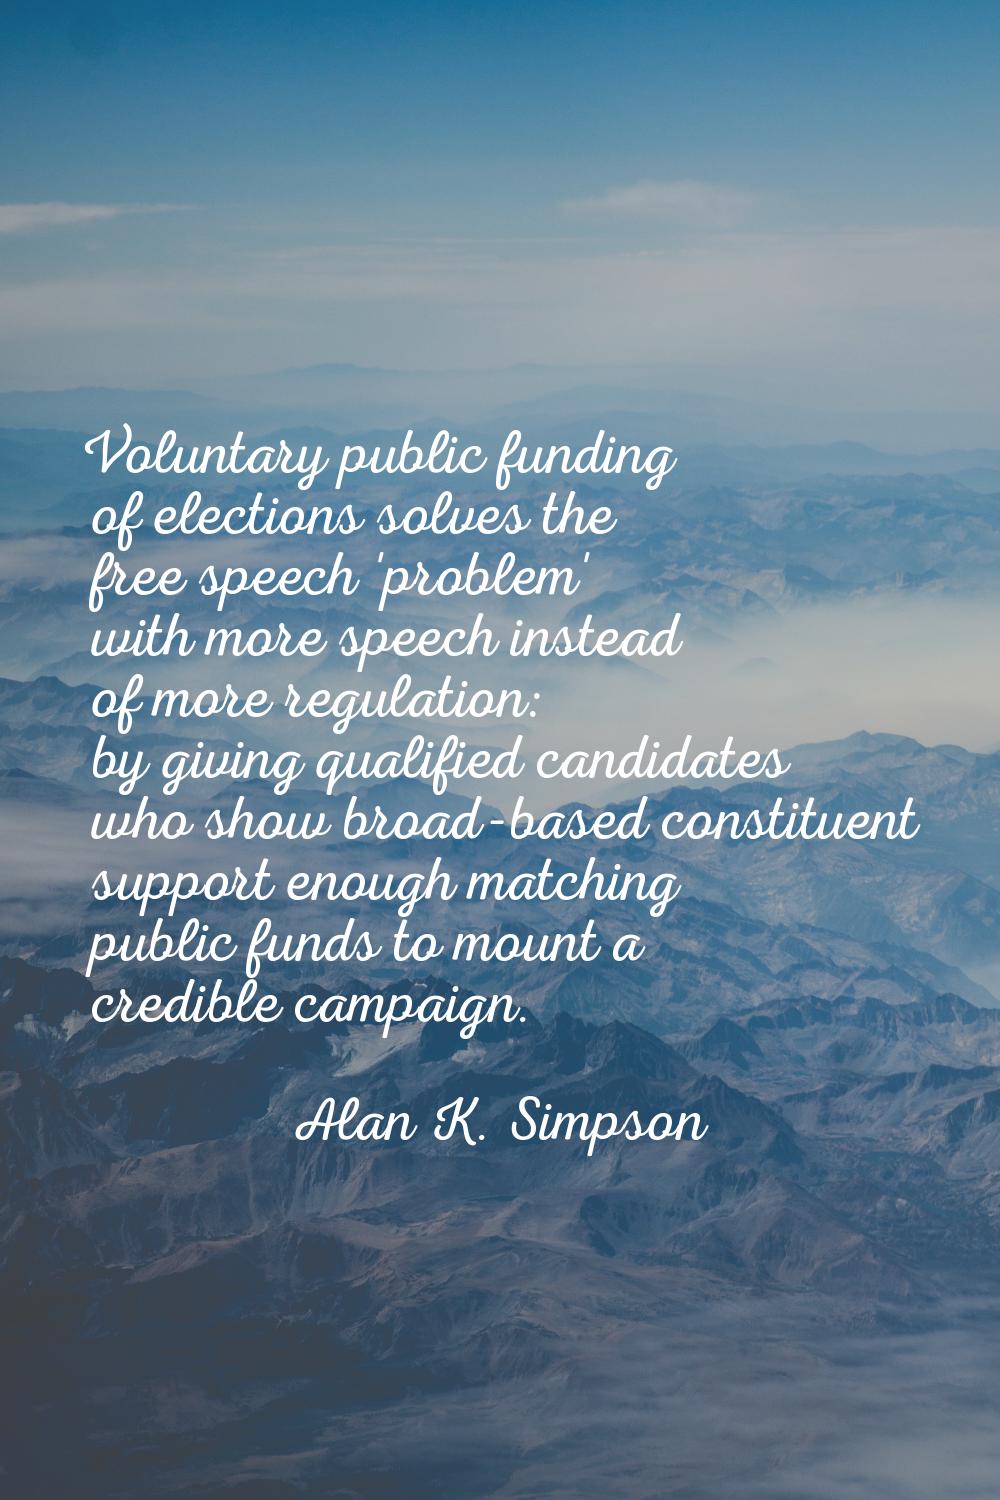 Voluntary public funding of elections solves the free speech 'problem' with more speech instead of 